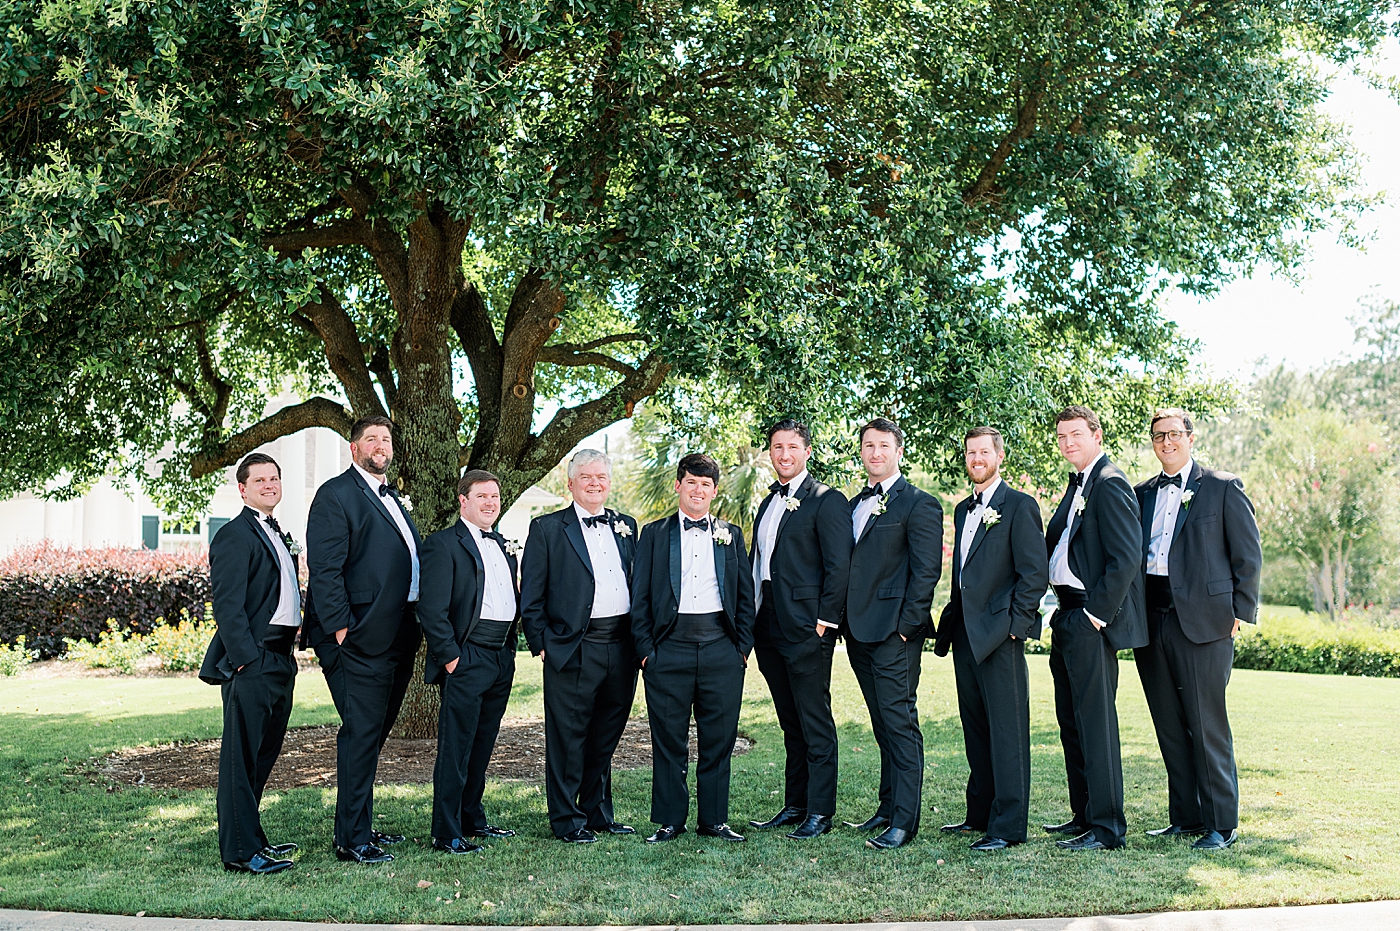 Groomsmen portraits during Simple Southern Country Club Wedding | Image by Annie Laura Photo